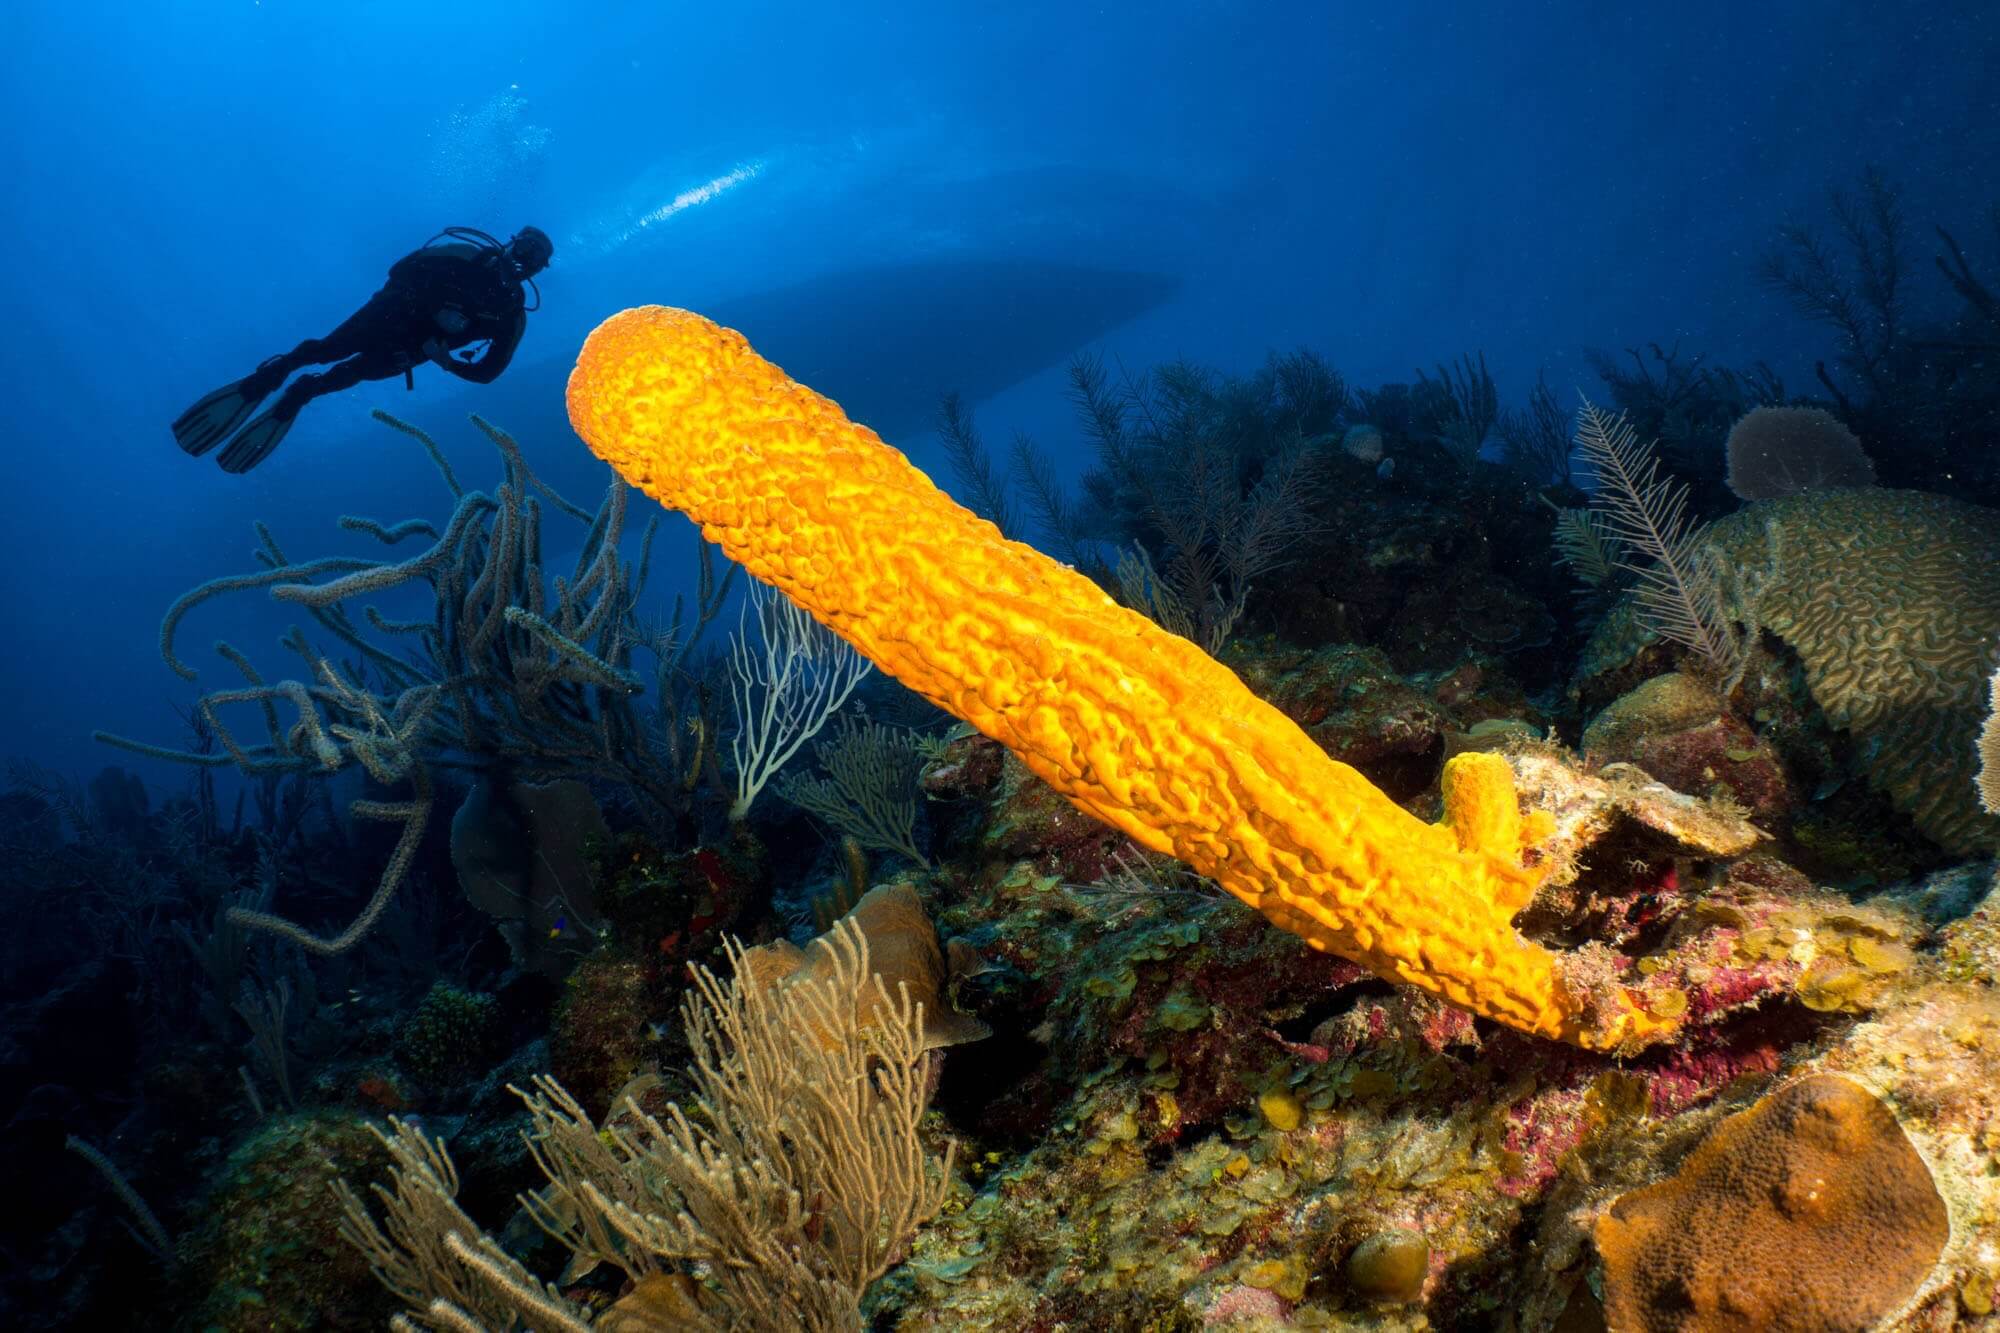 A yellow tube sponge with a scuba diver and the Belize Aggressor III liveaboard in the background